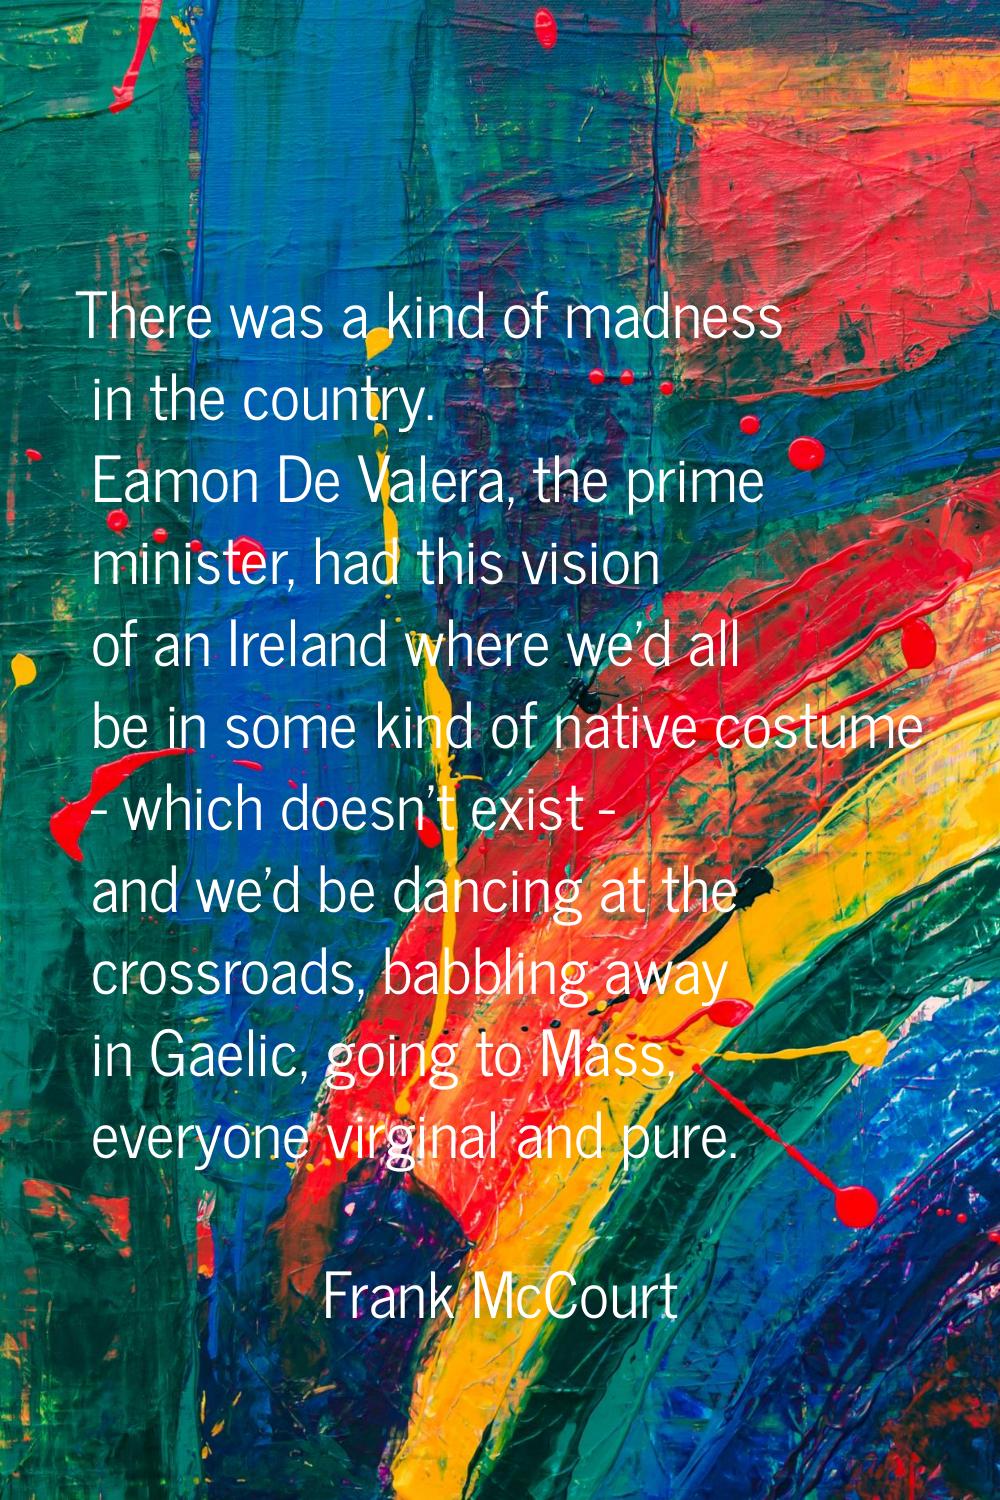 There was a kind of madness in the country. Eamon De Valera, the prime minister, had this vision of